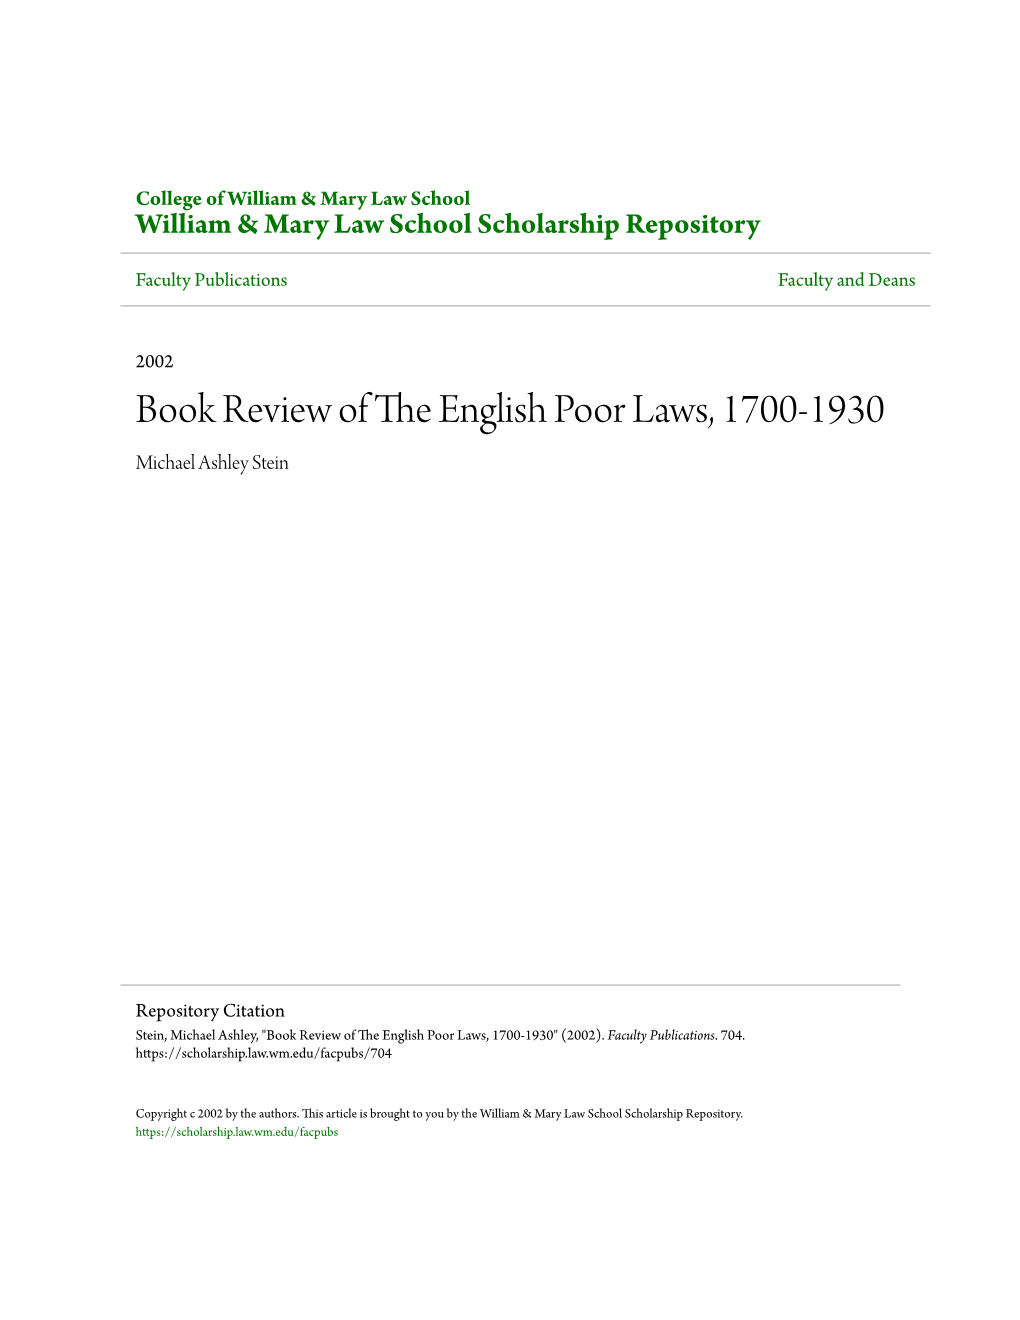 Book Review of the English Poor Laws, 1700-1930